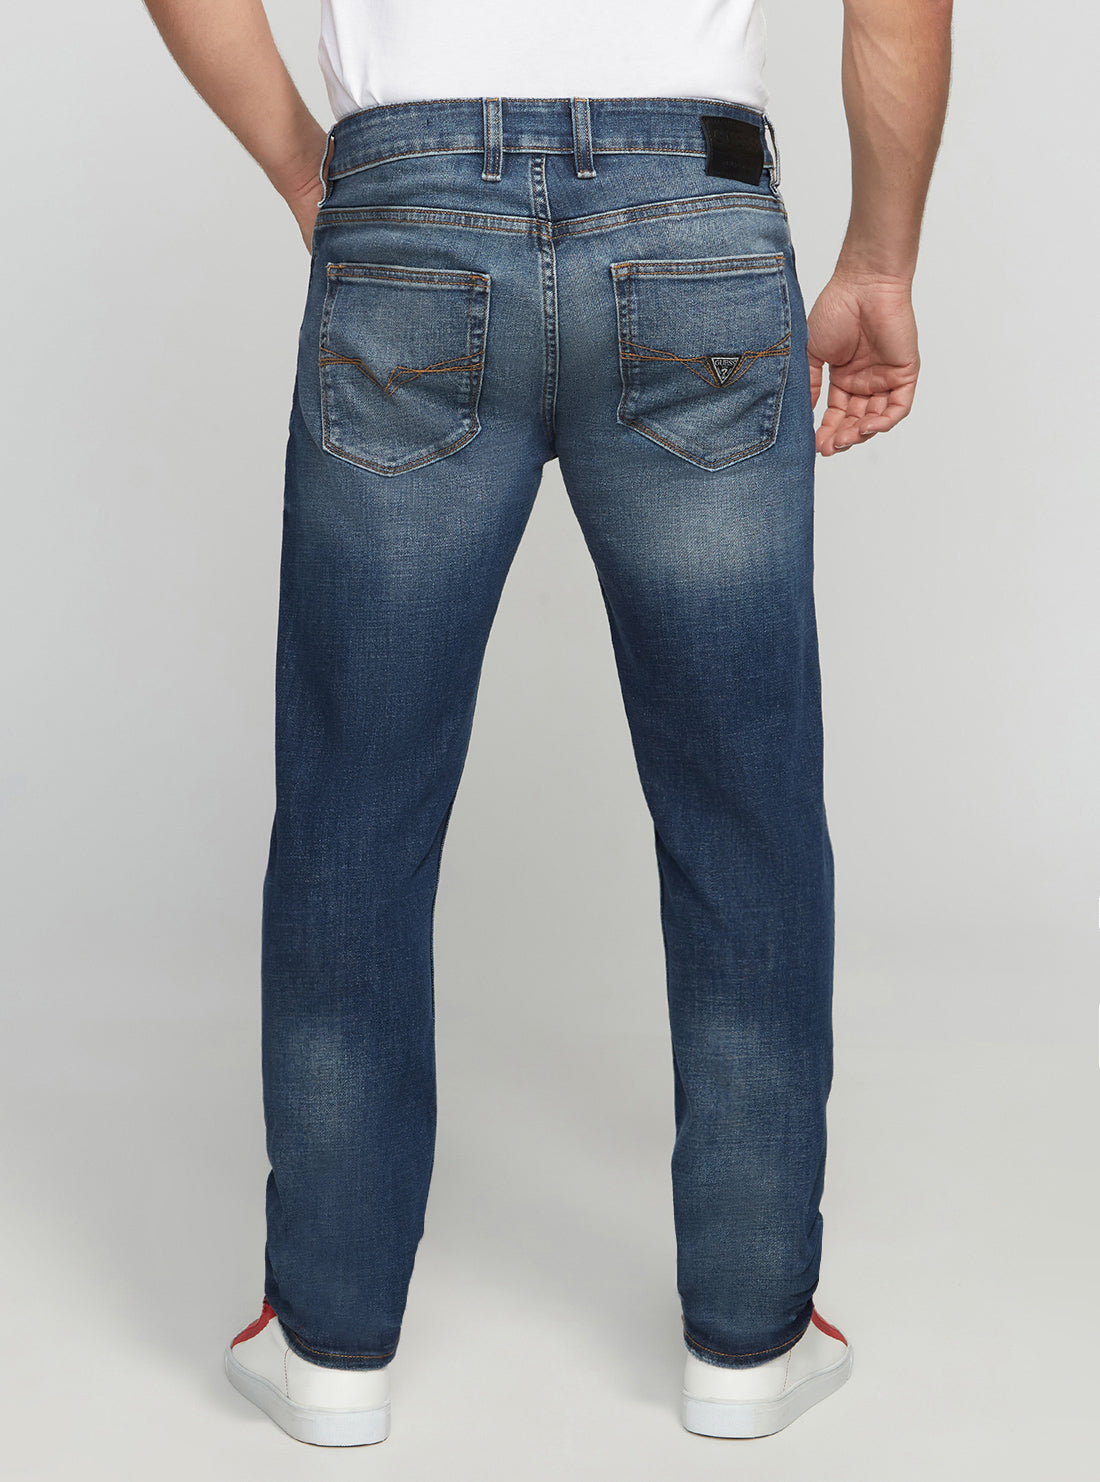 GUESS Men's Eco Low-Rise Slim Tapered Denim Jeans In Stratus Blue Wash MBGAS230411 Back View